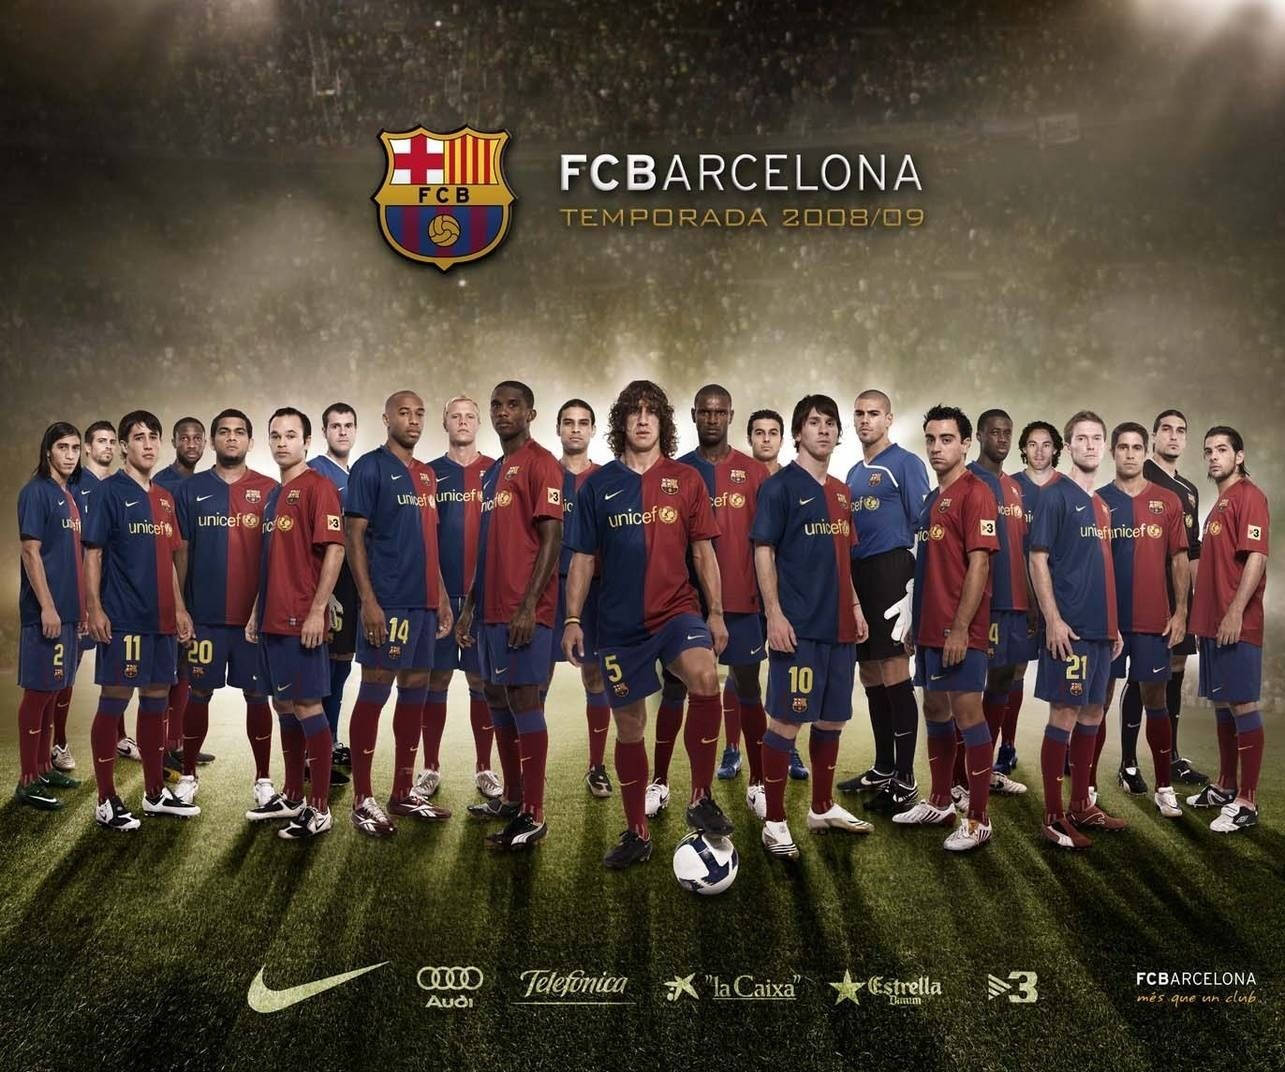 Barca Fans Show Up in Force for a Match at Camp Nou Wallpaper